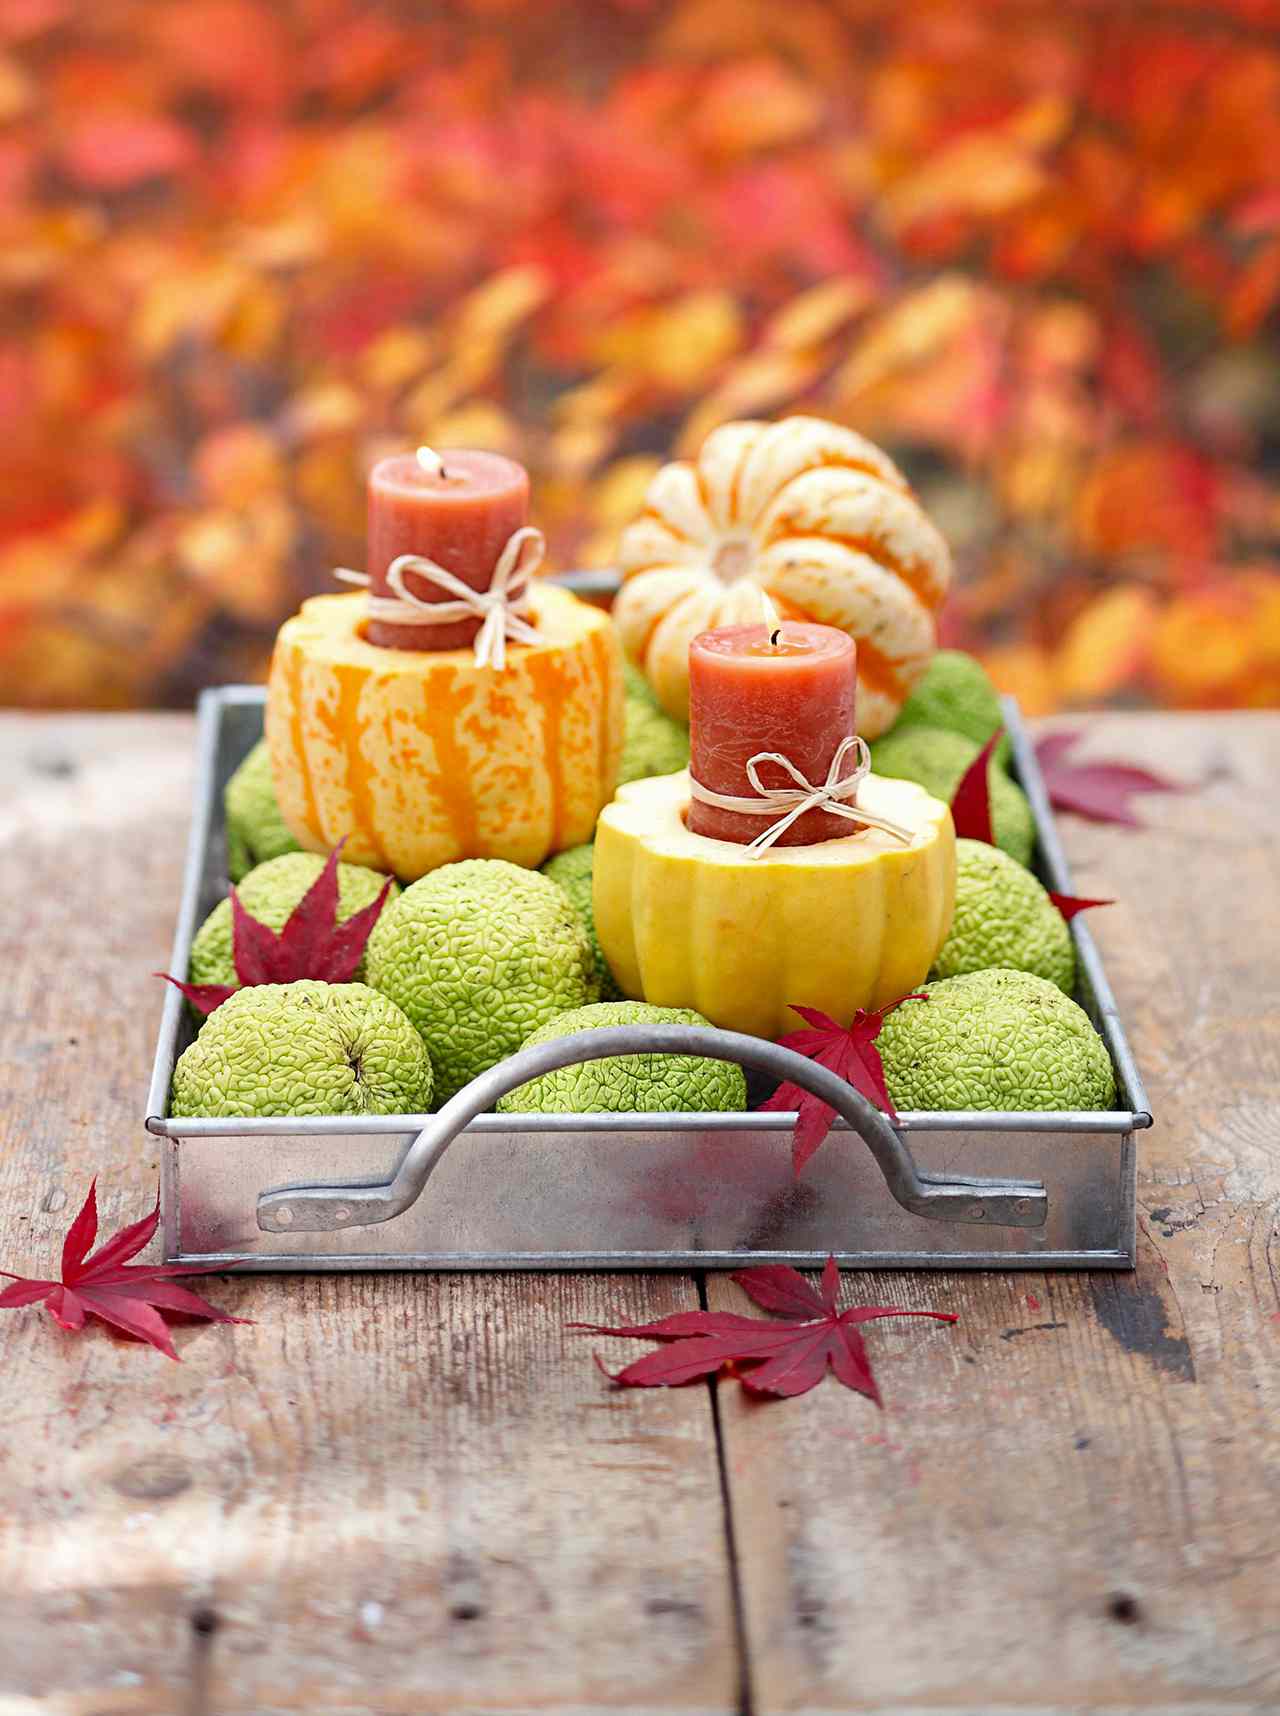 gourd candleholder tray with hedge apples